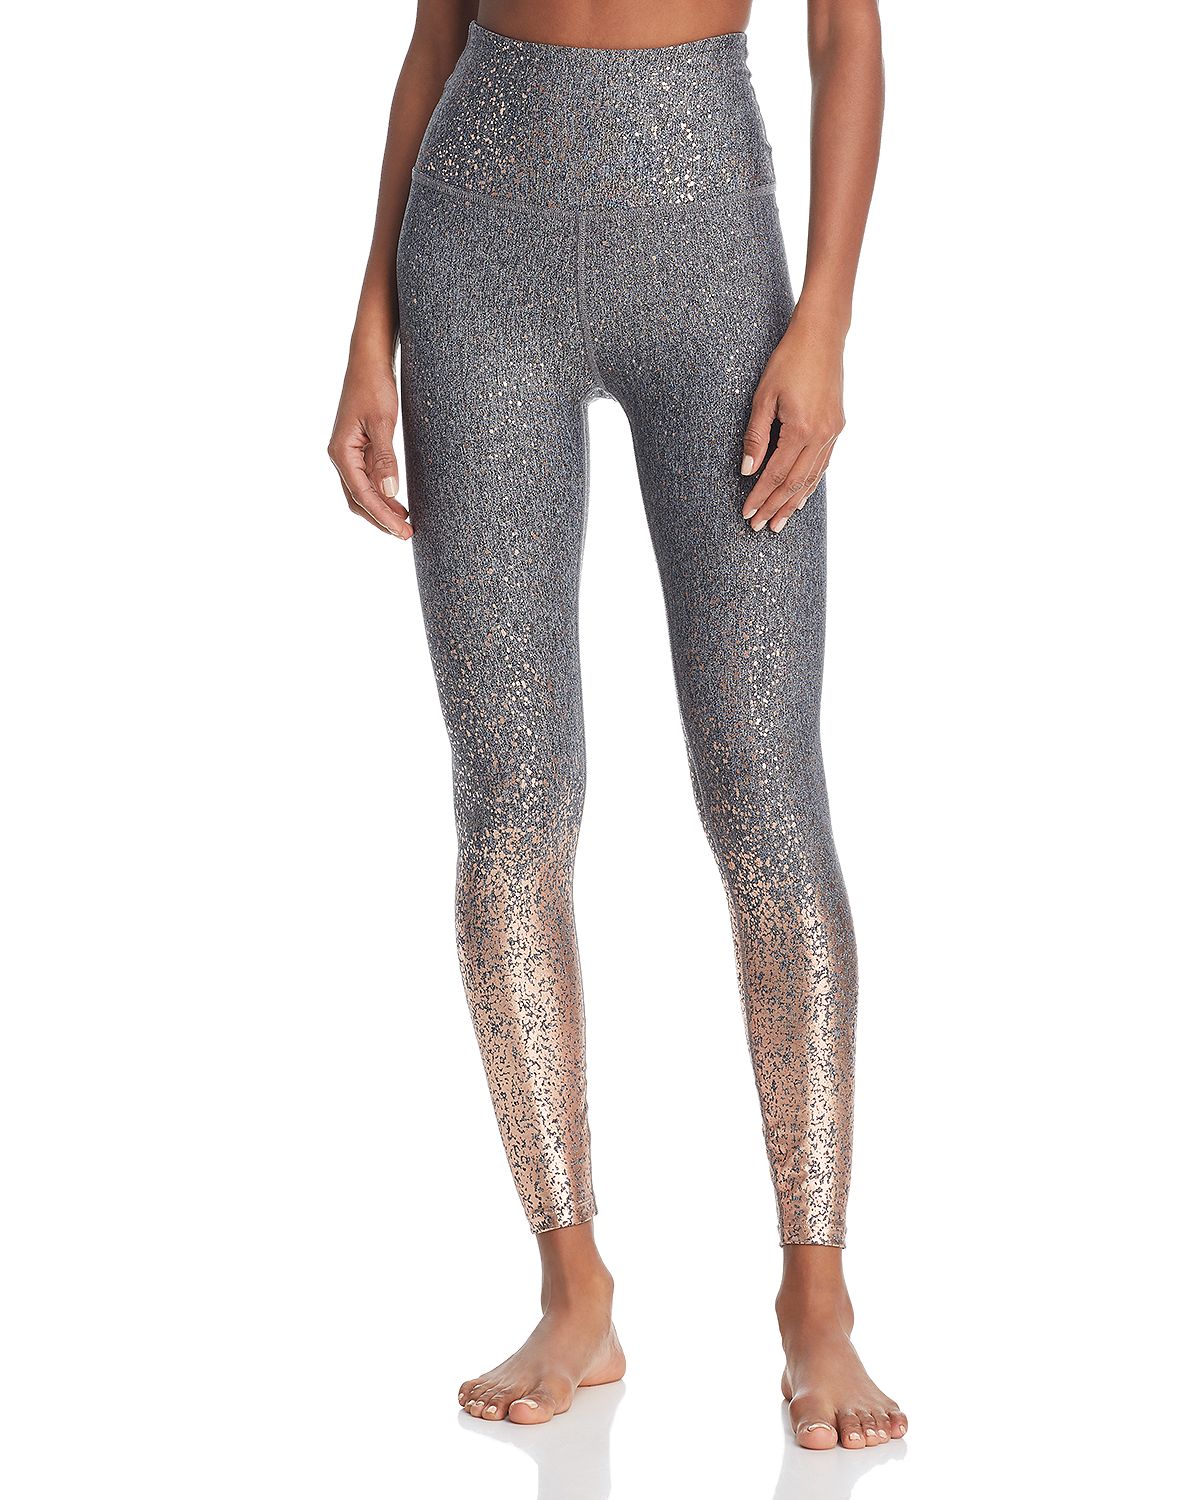 Glitter Shimmer Tights in Silver and White - The Sugarpuss Collection